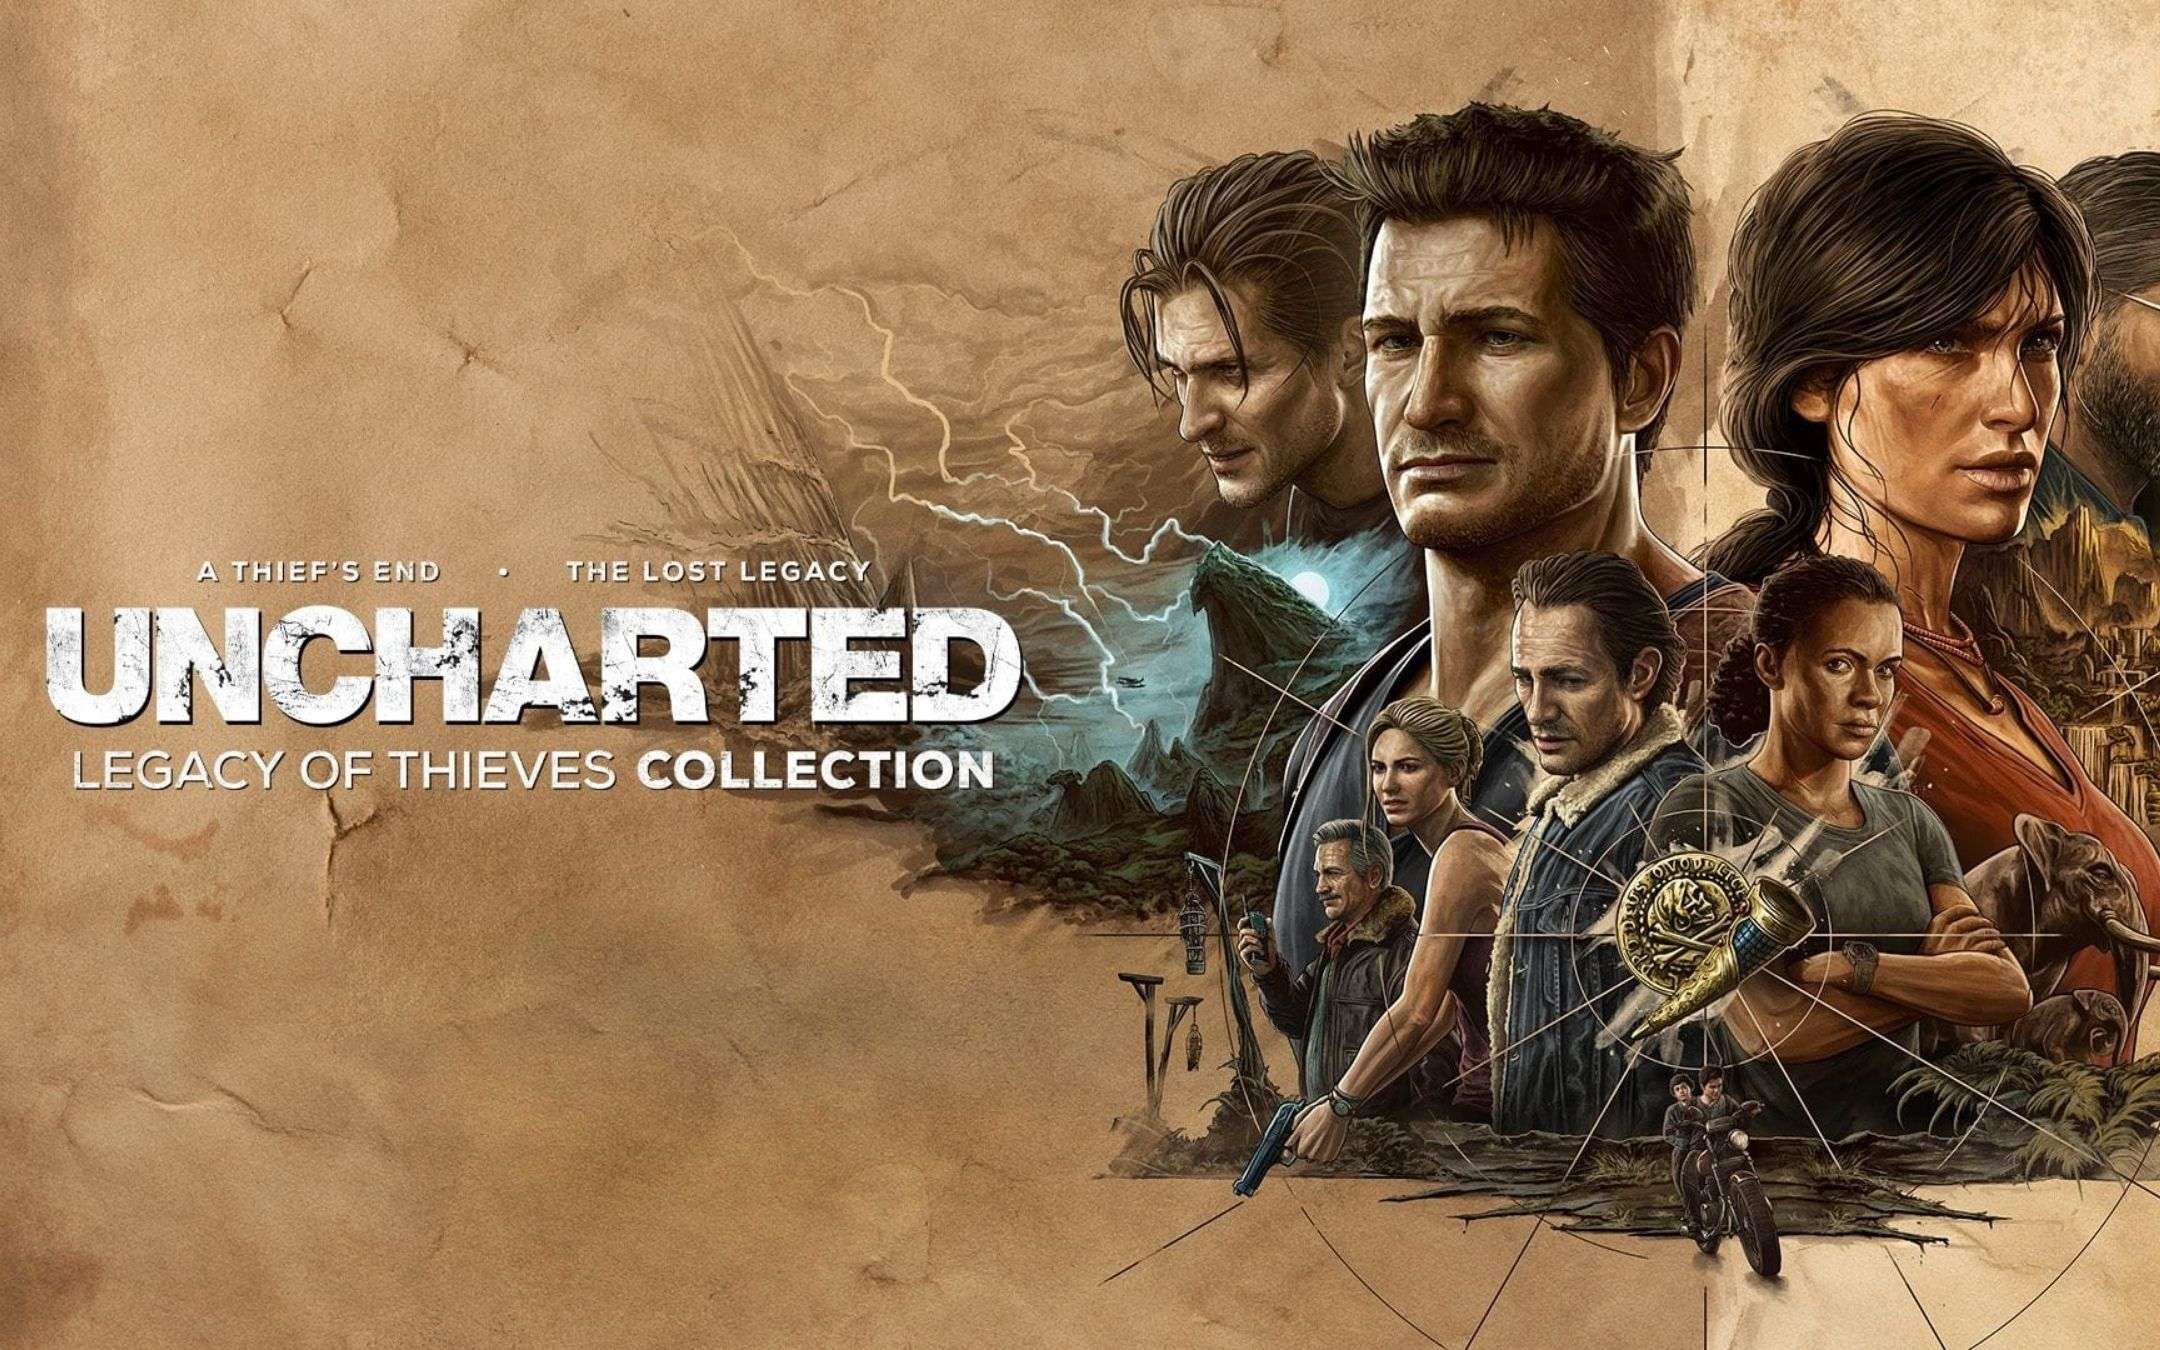 Legacy of thieves collection купить. Игра Uncharted: Legacy of Thieves collection (ps5). Uncharted 4 Legacy of Thieves collection. Анчартед наследие воров ps4. Uncharted collection ps5.